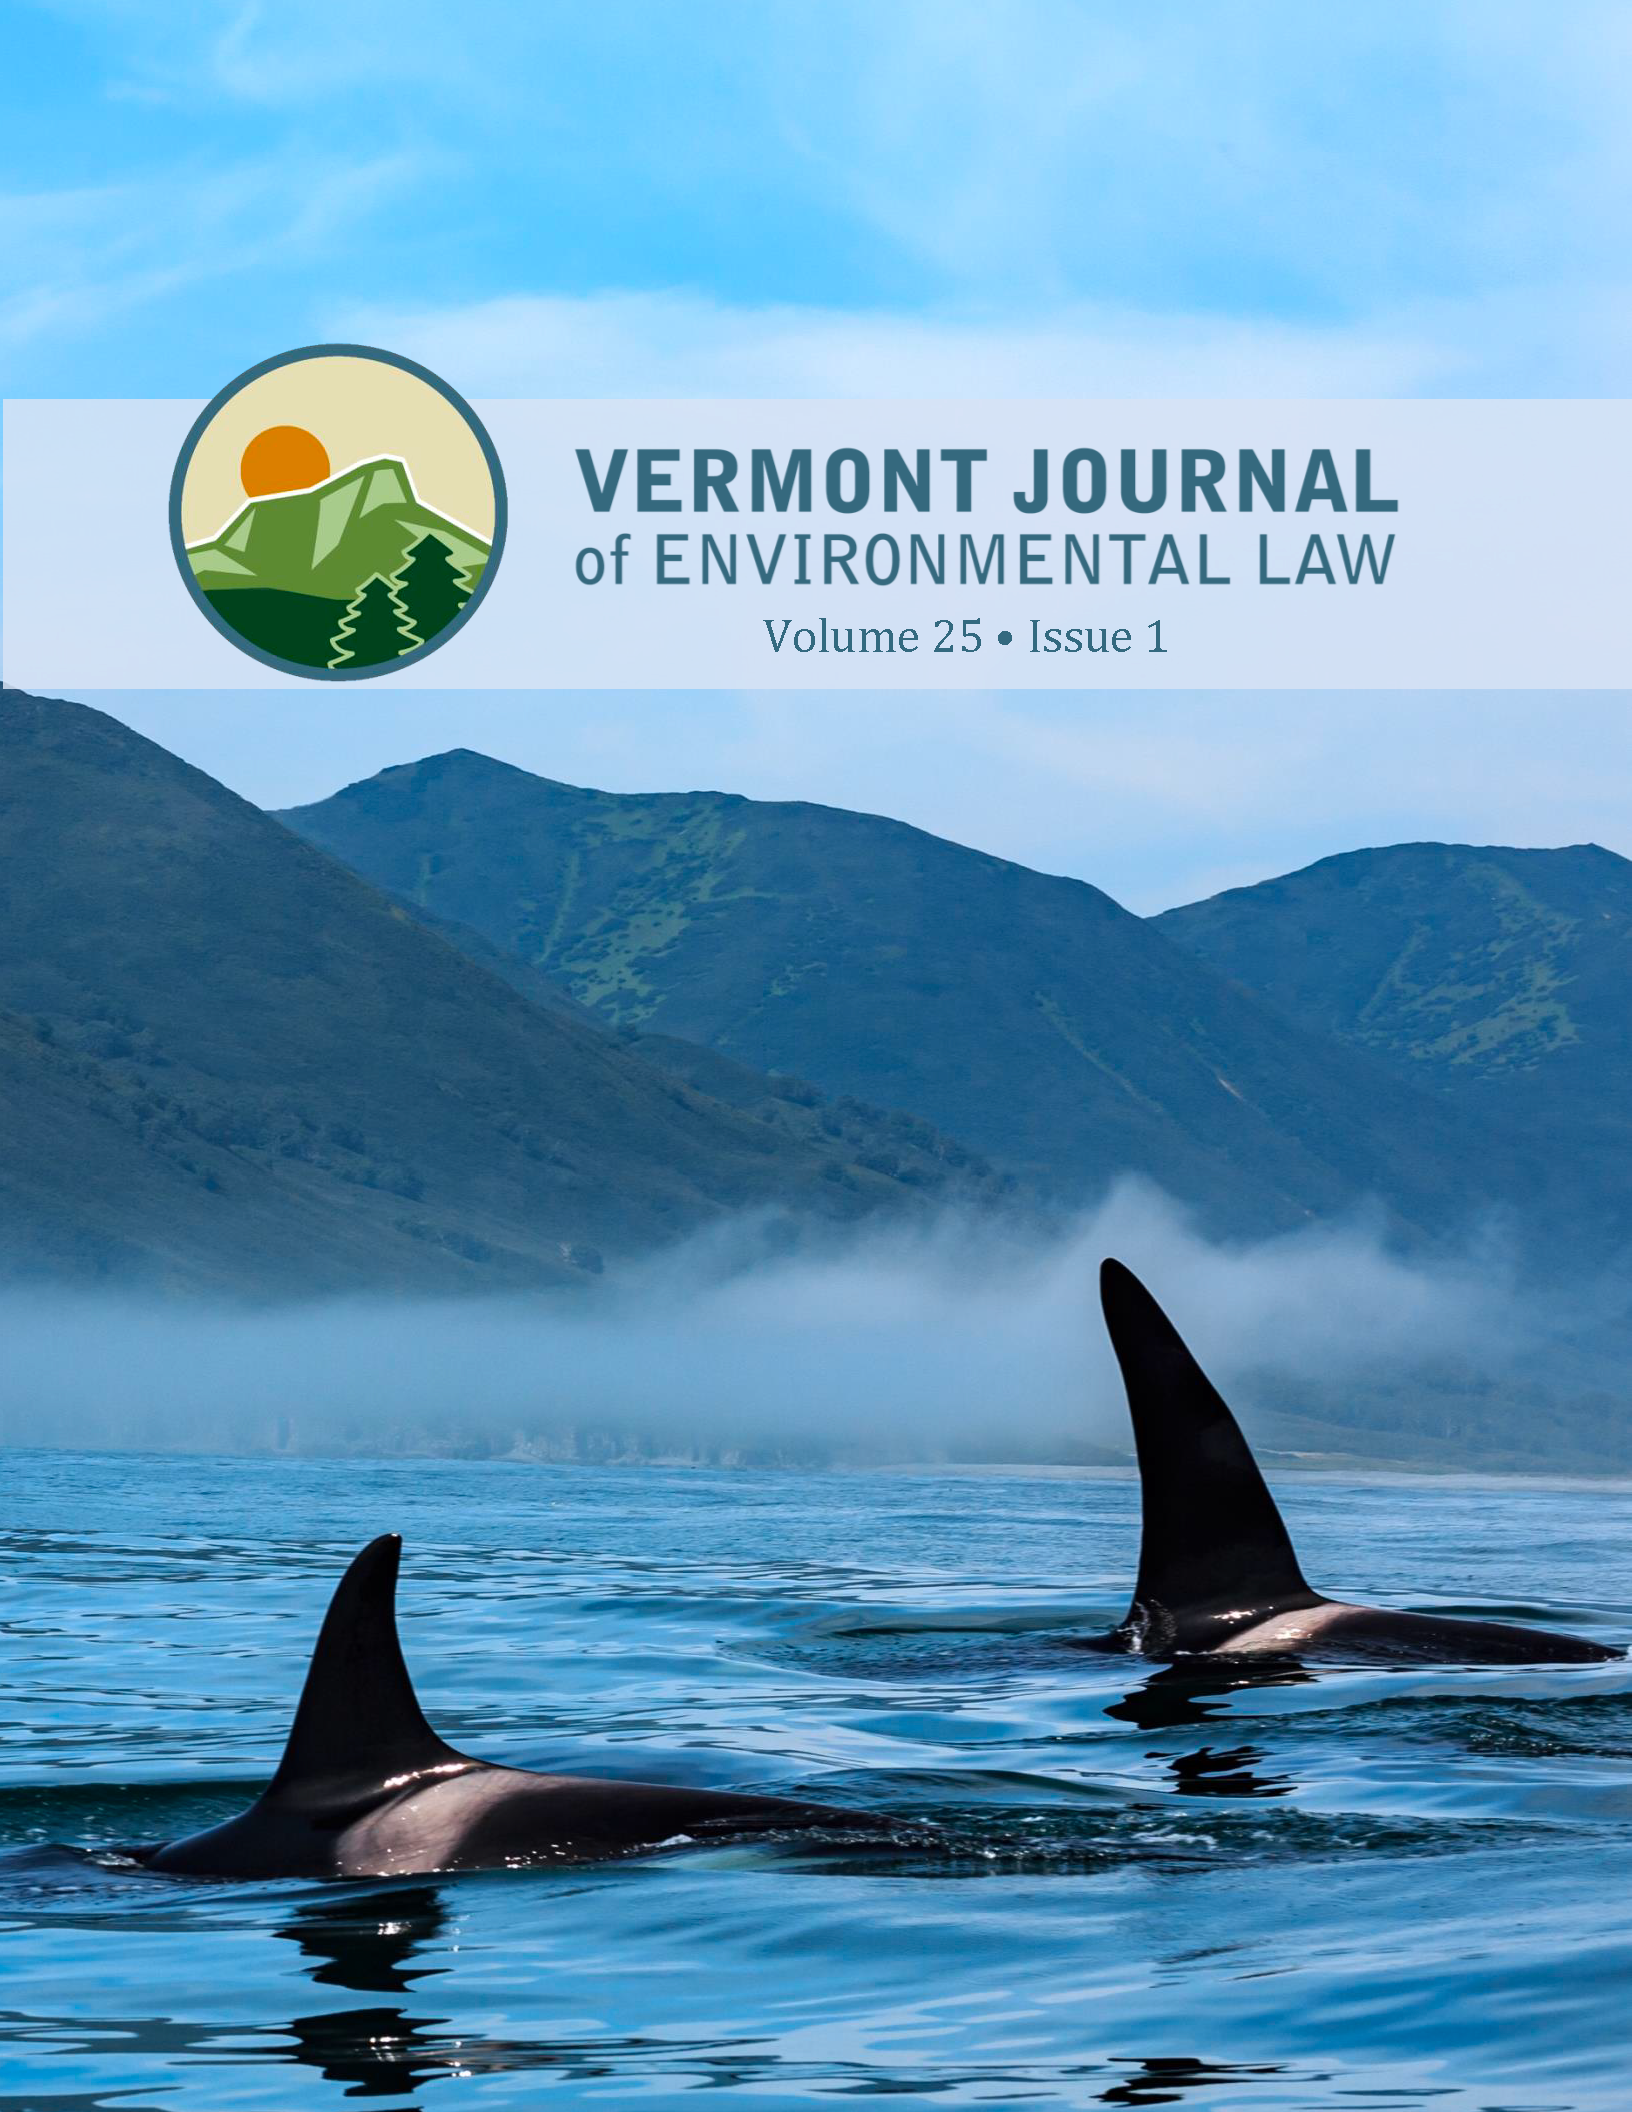 Published: Volume 25, Issue 1 of the Vermont Journal of Environmental Law